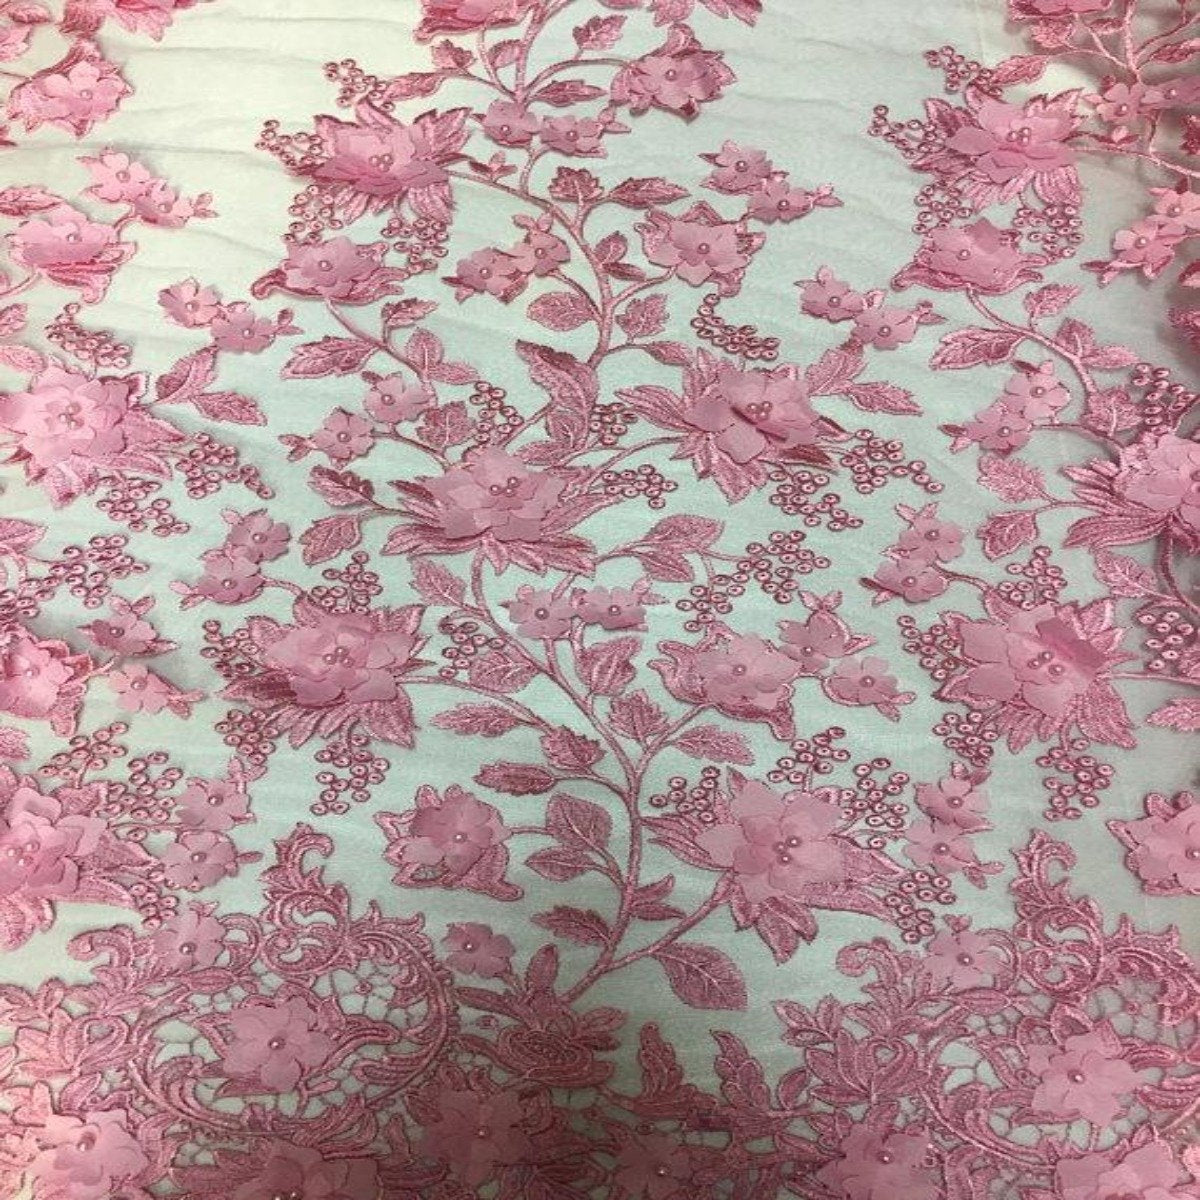 Pink 3D Embroidered Satin Floral Pearl Wedding Prom Formal Lace Fabric